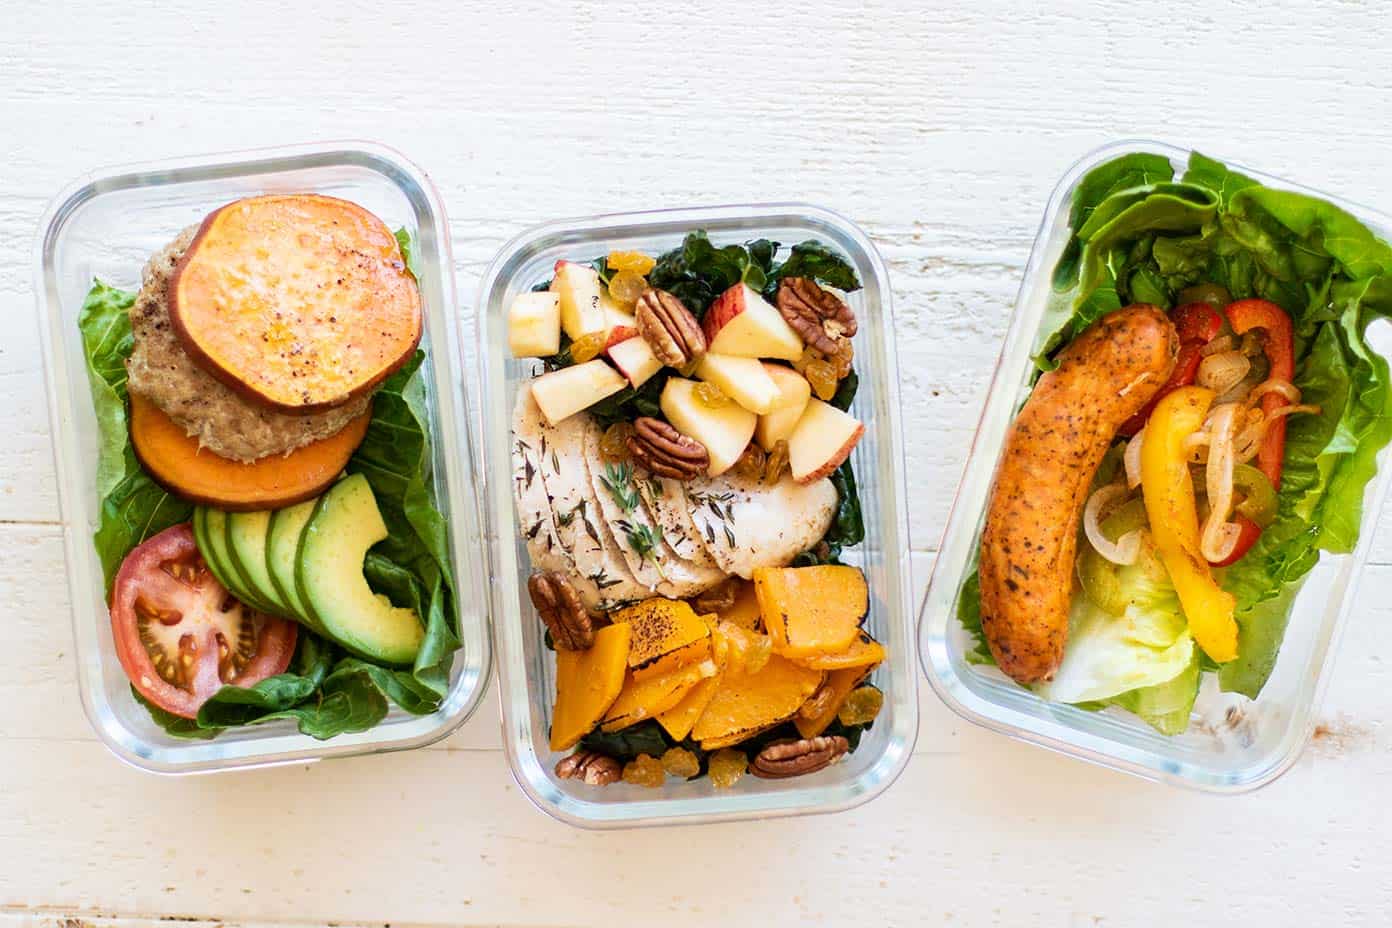 https://sunkissedkitchen.com/wp-content/uploads/2018/08/whole30-lunches.jpg